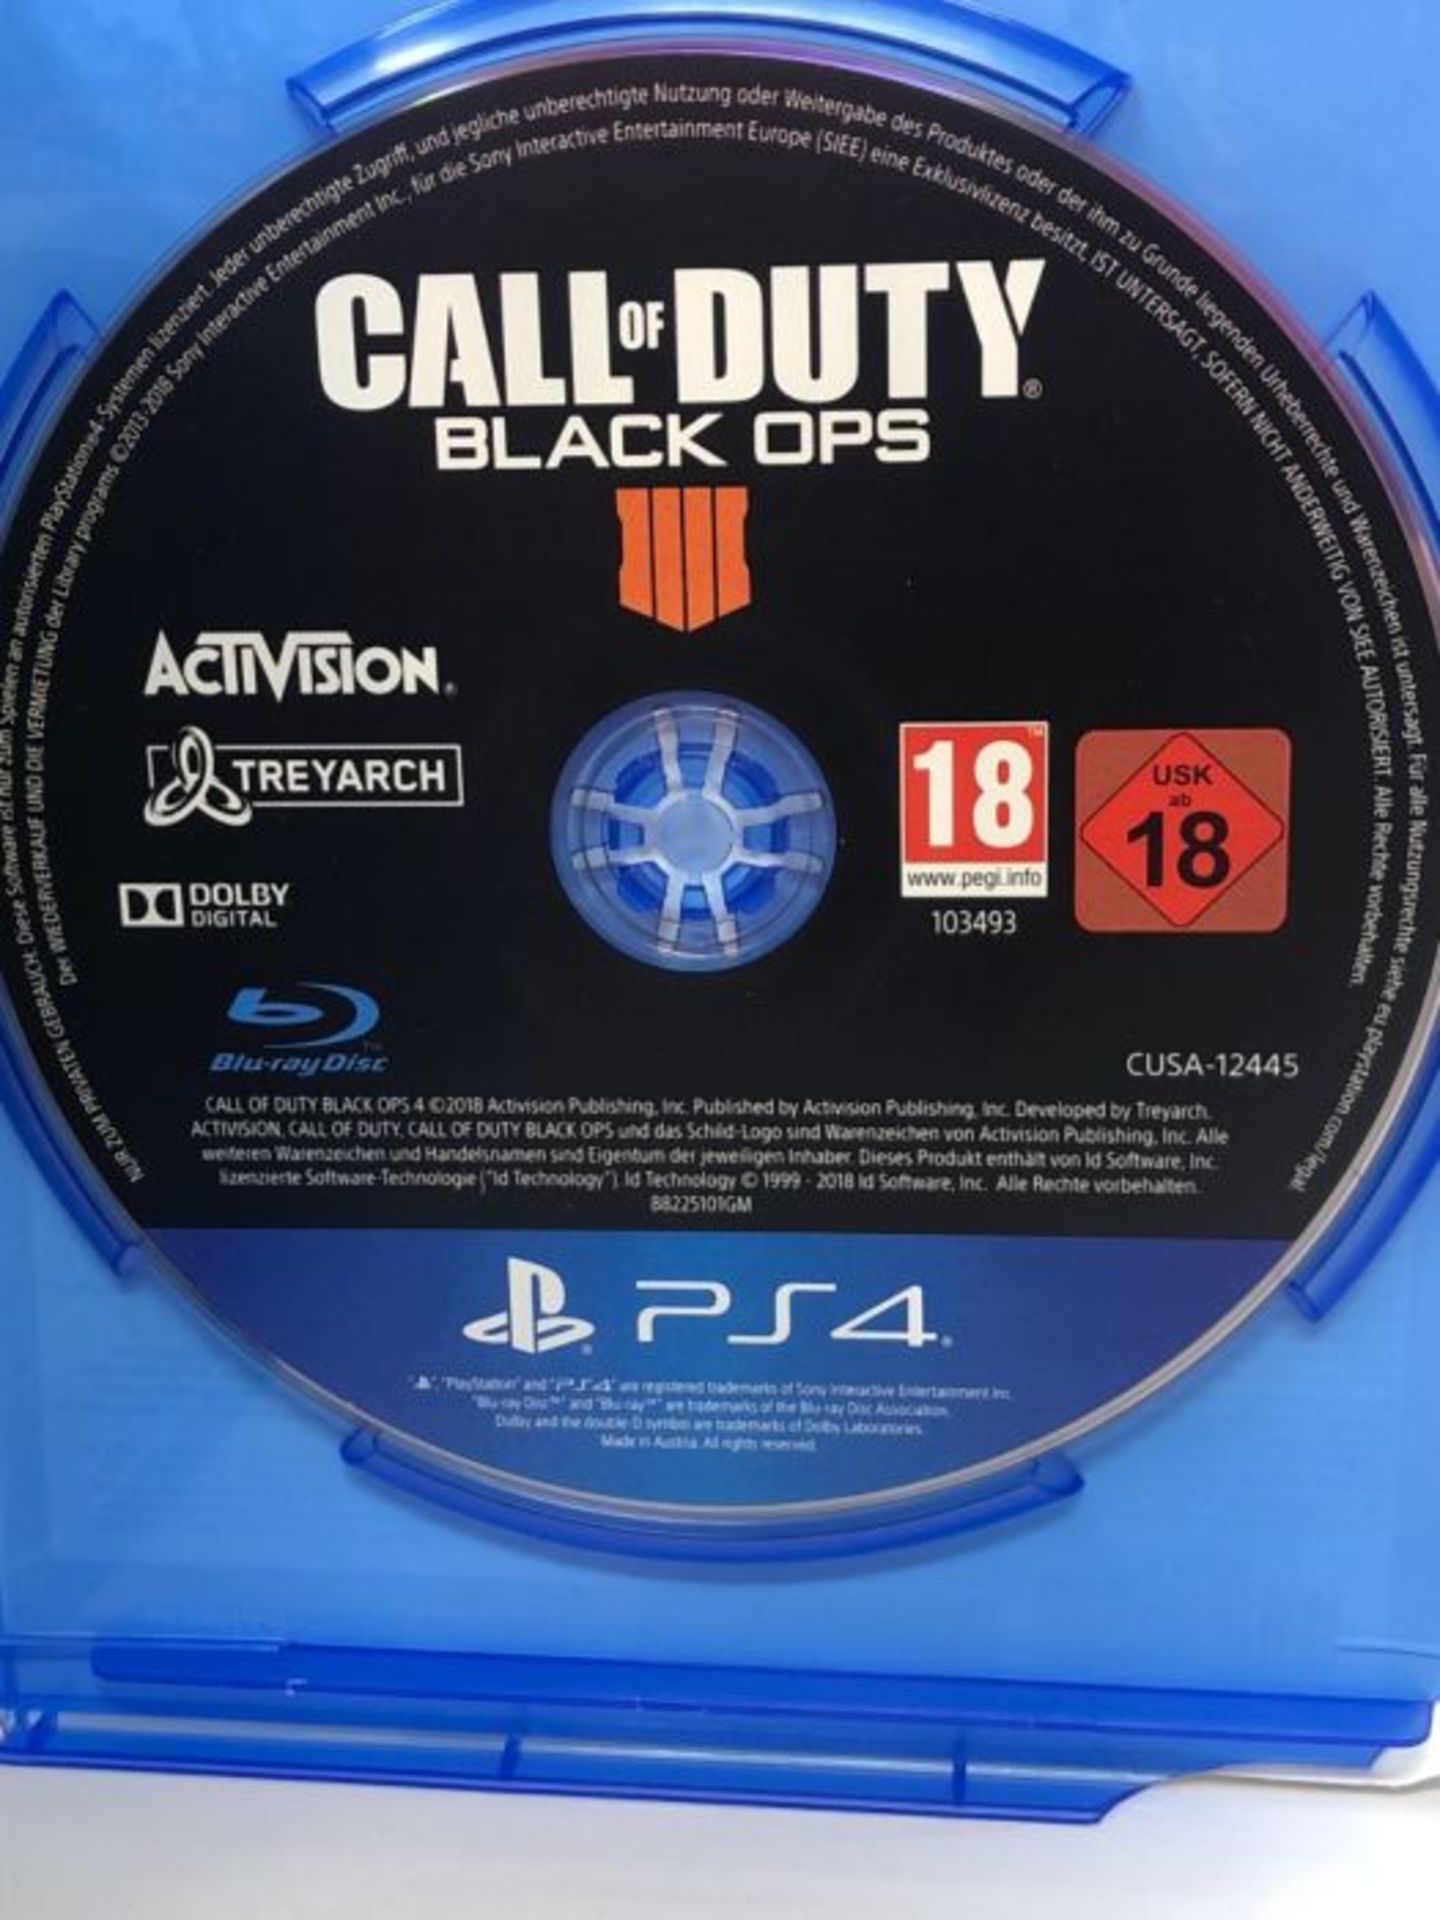 RRP £53.00 Call of Duty Black Ops 4 - Standard Edition - [PlayStation 4] - Image 3 of 3